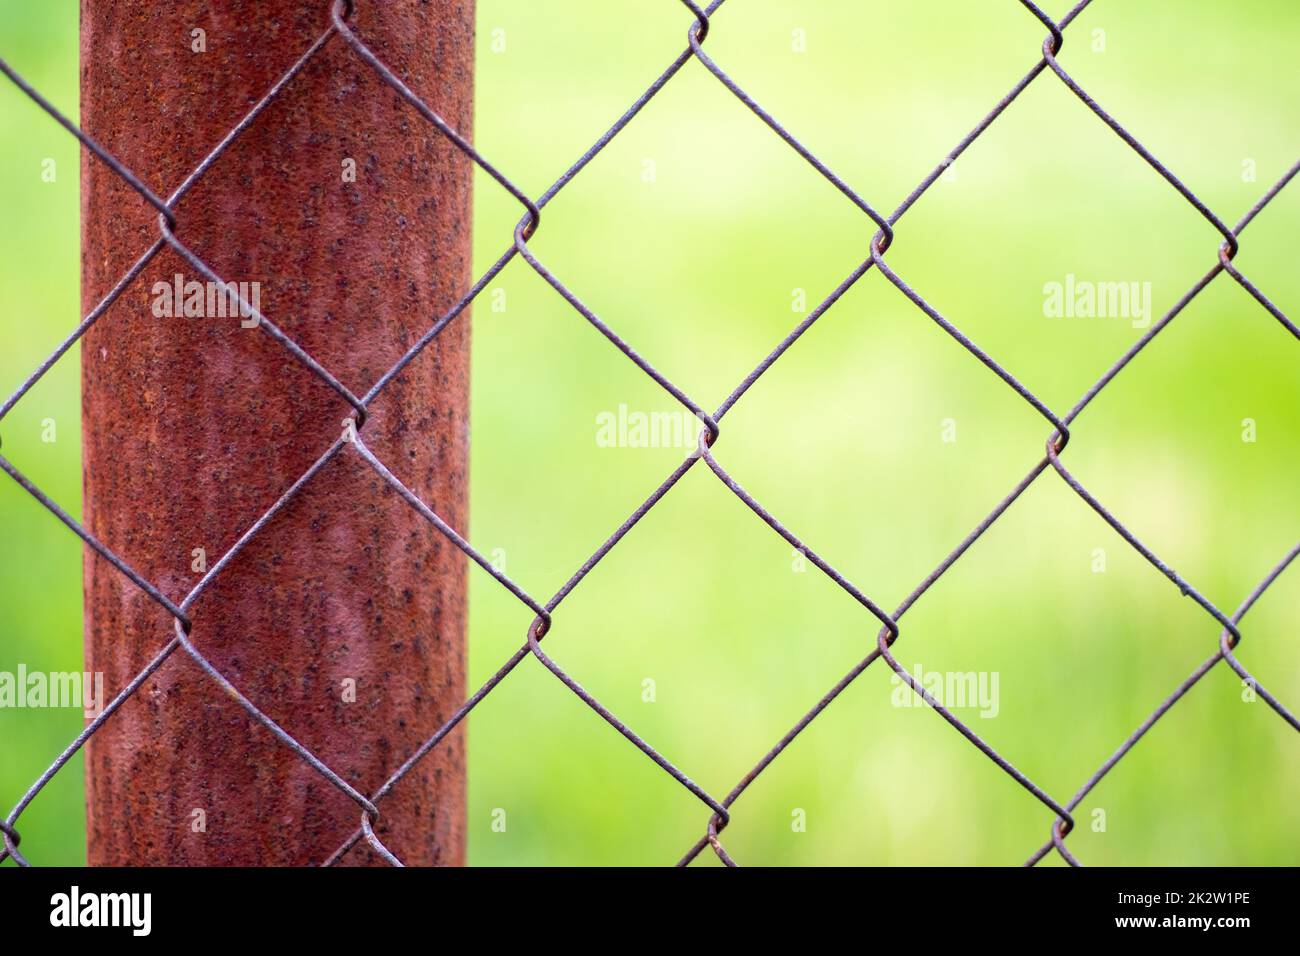 A mesh cage in a garden and a rusty pole with green grass as a background. Metal fence with wire mesh. Blurred view of the countryside through a steel iron mesh fence. Abstract background. Stock Photo